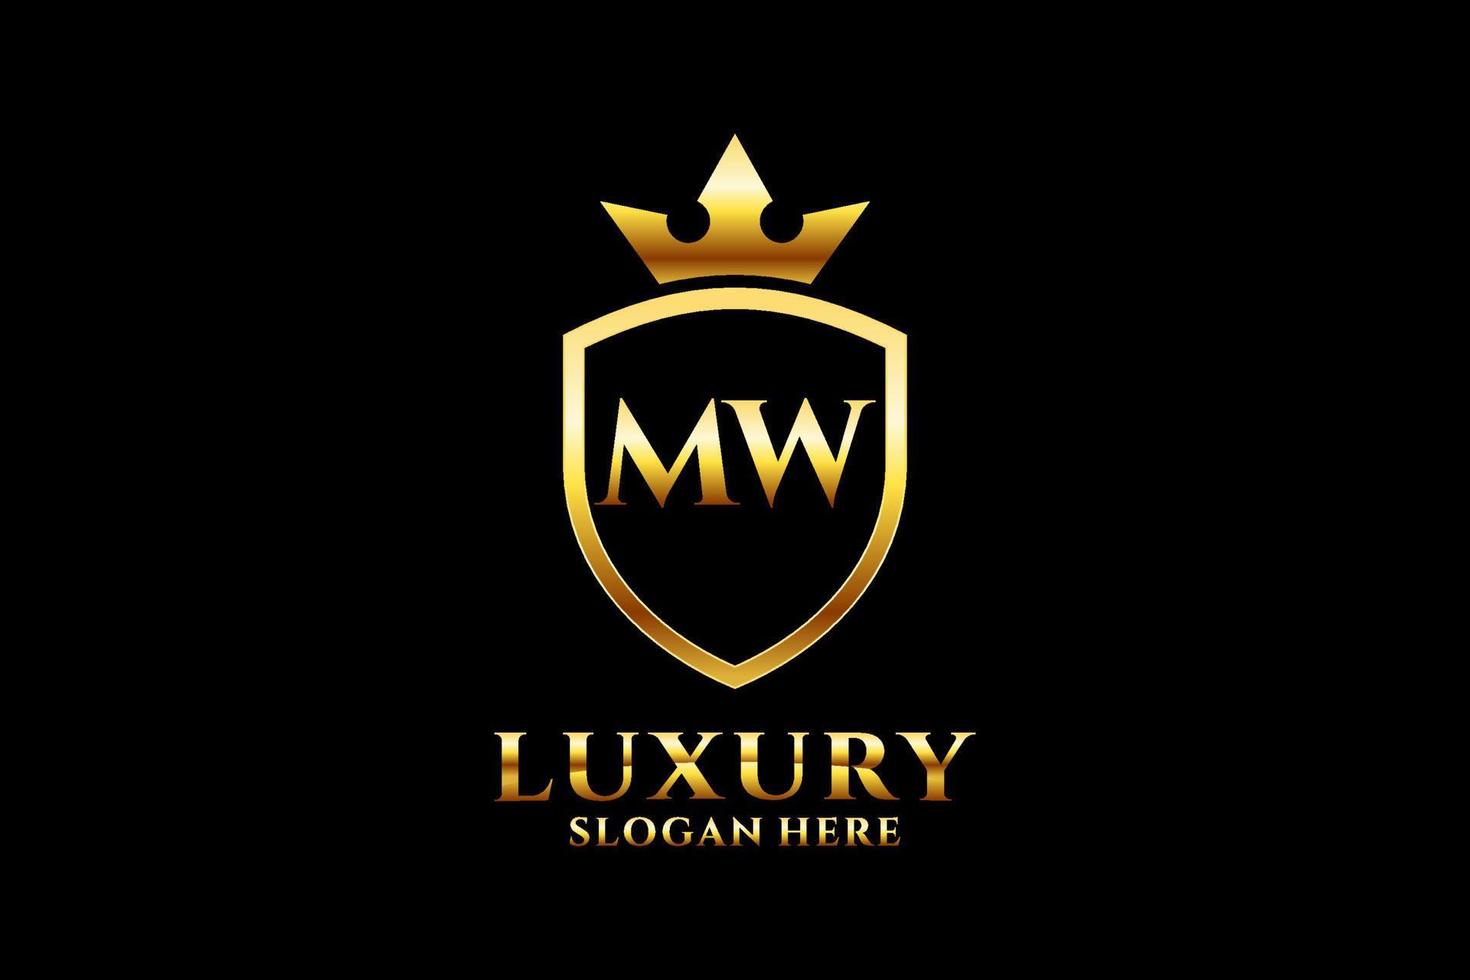 initial MW elegant luxury monogram logo or badge template with scrolls and royal crown - perfect for luxurious branding projects vector